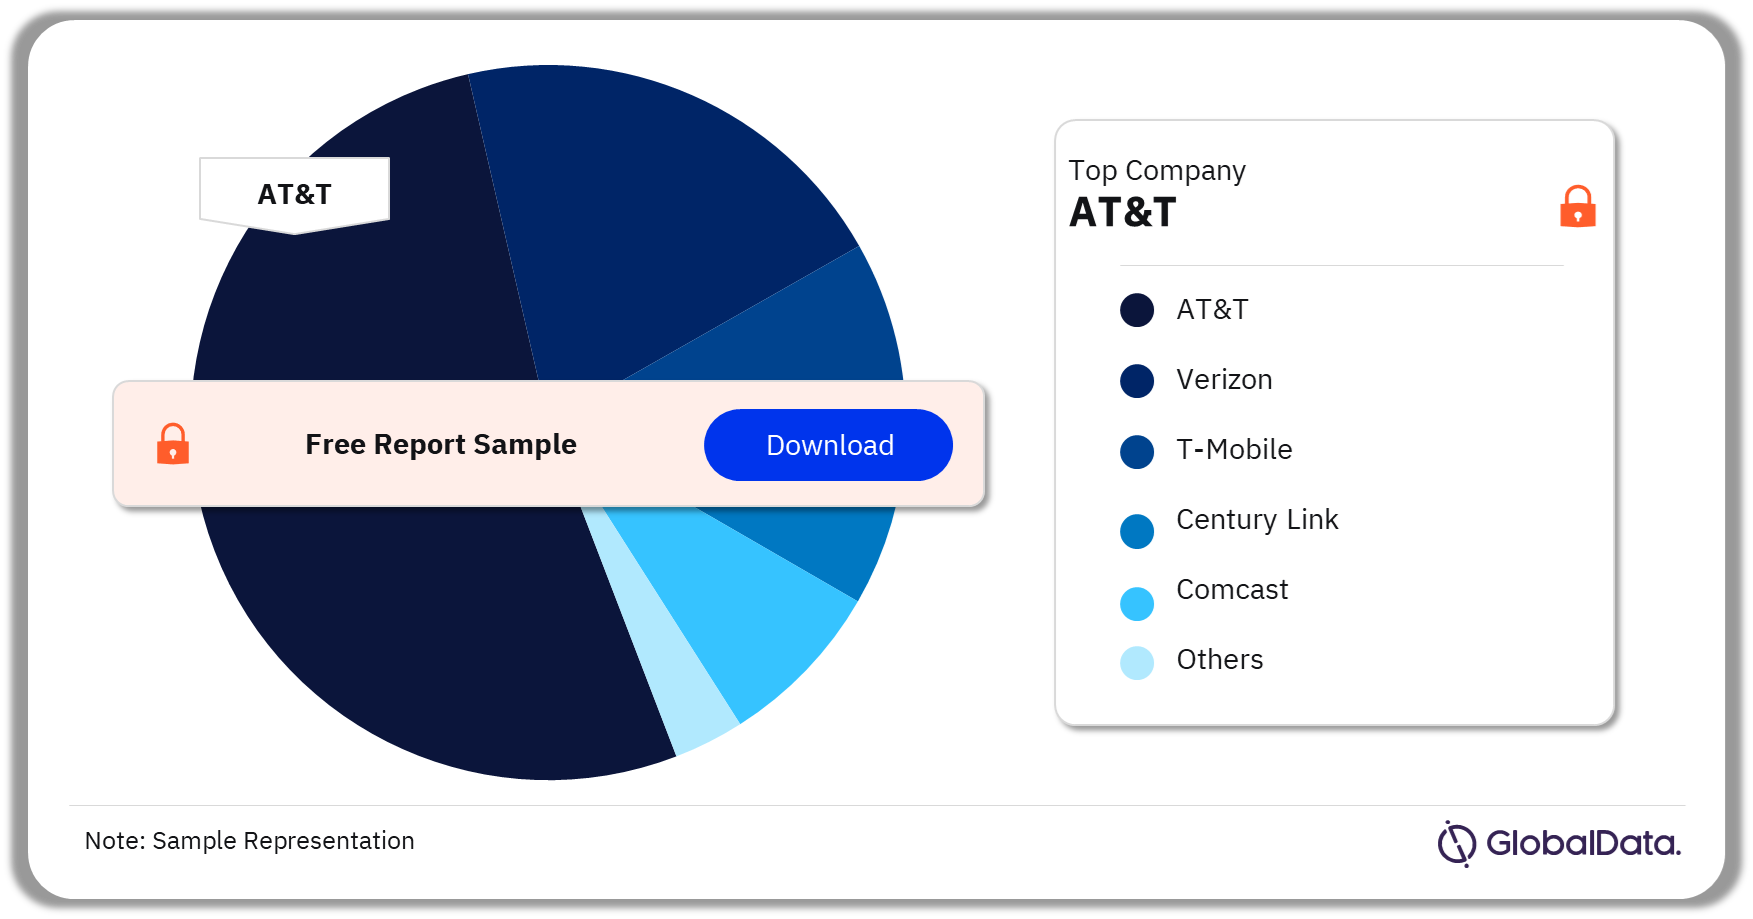 United States Telecom Services Market Share by Companies, 2022 (%)